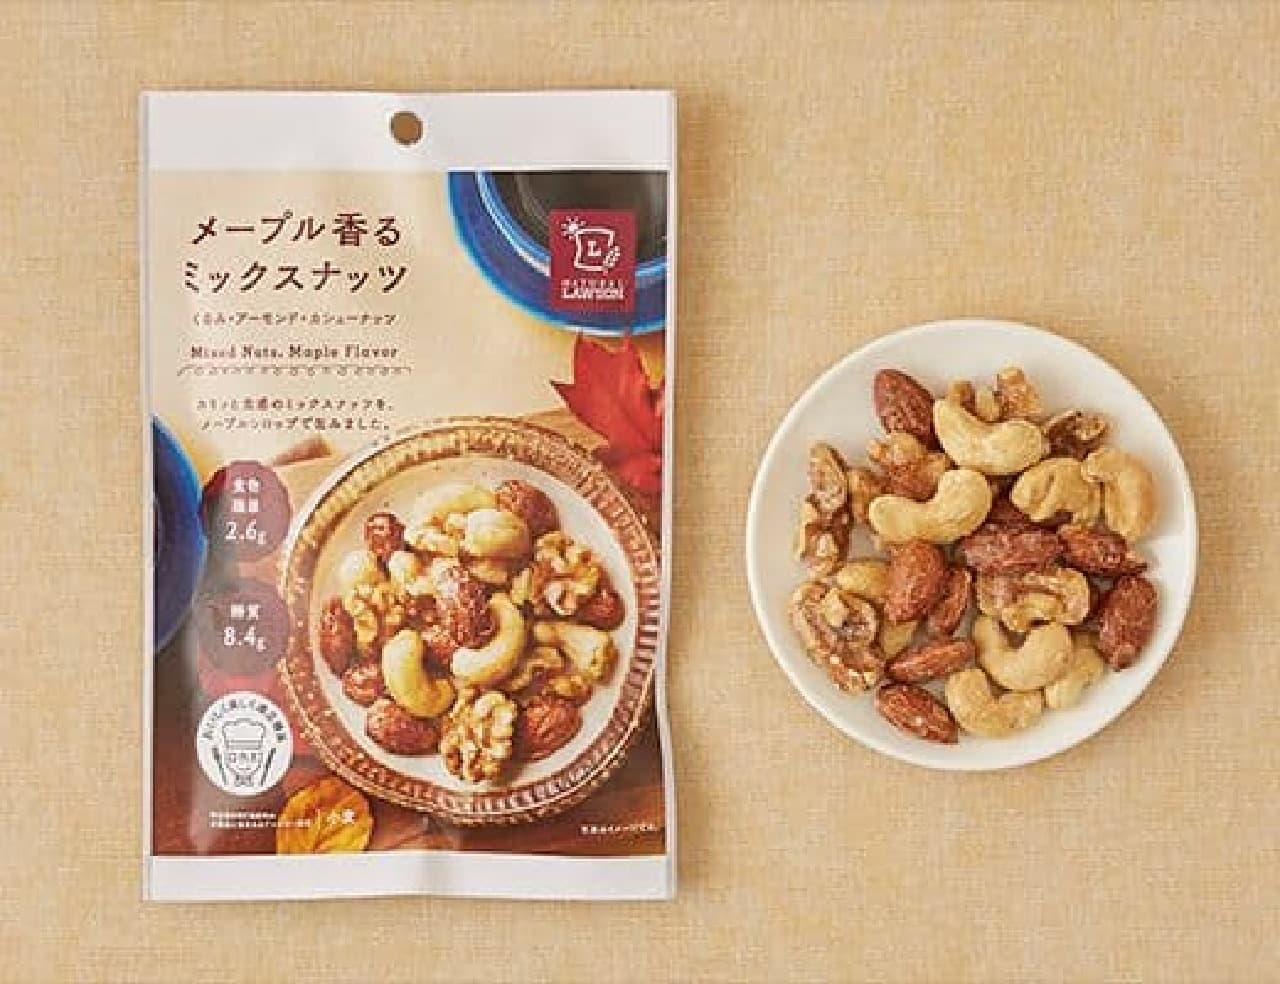 Lawson, "Maple-Scented Mixed Nuts, 37g"